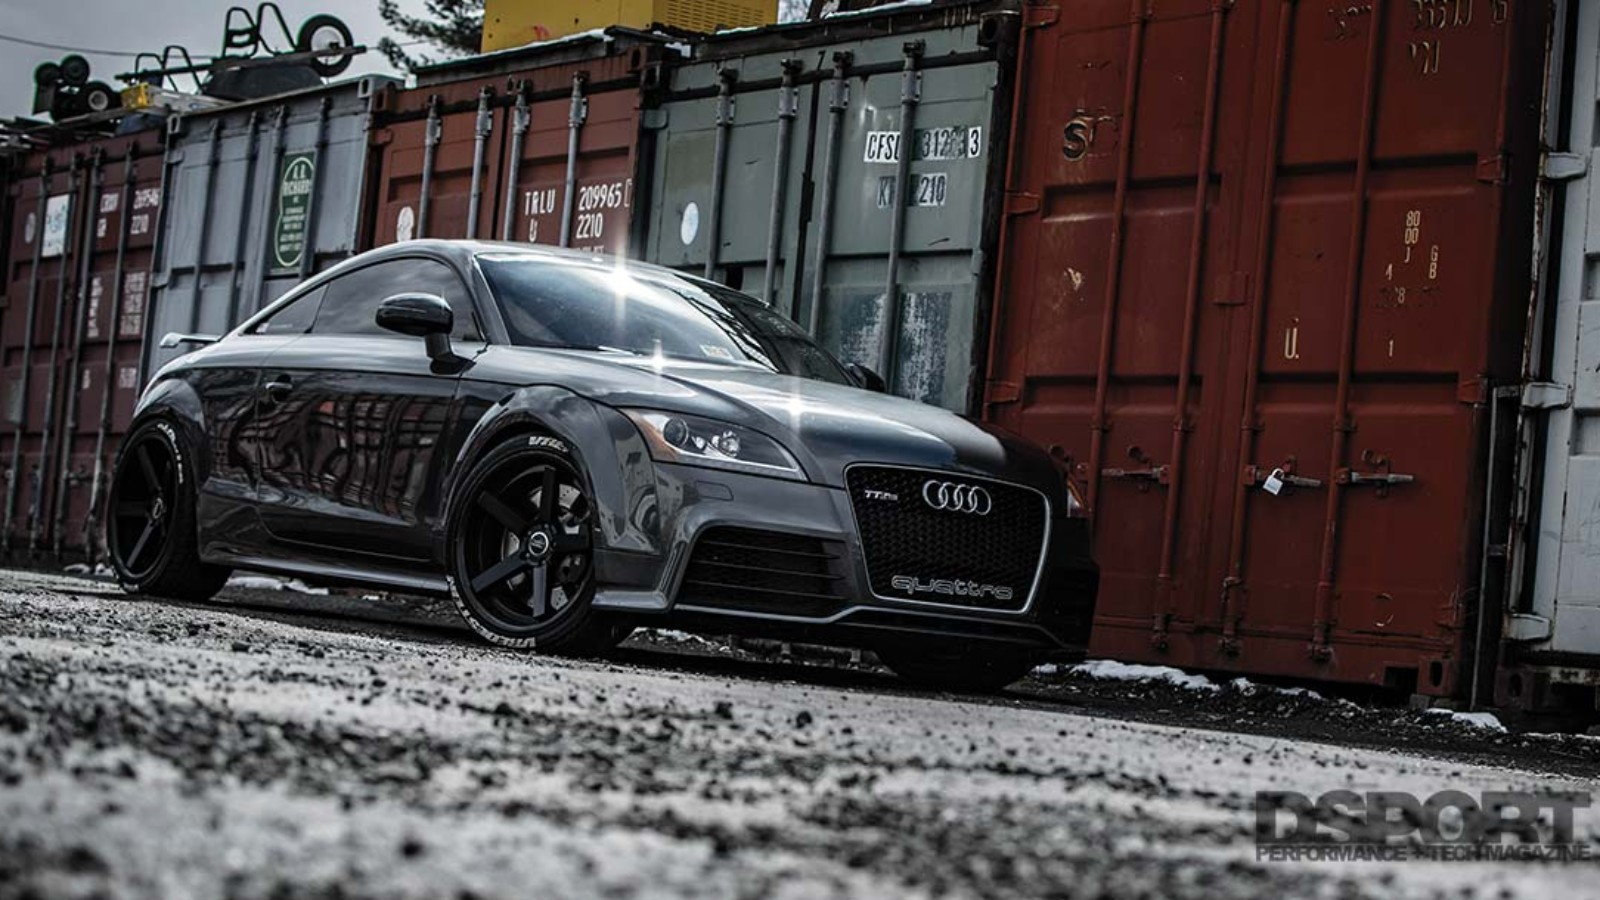 TT RS Archives - Page 3 of 3 - Audi Tuning Mag